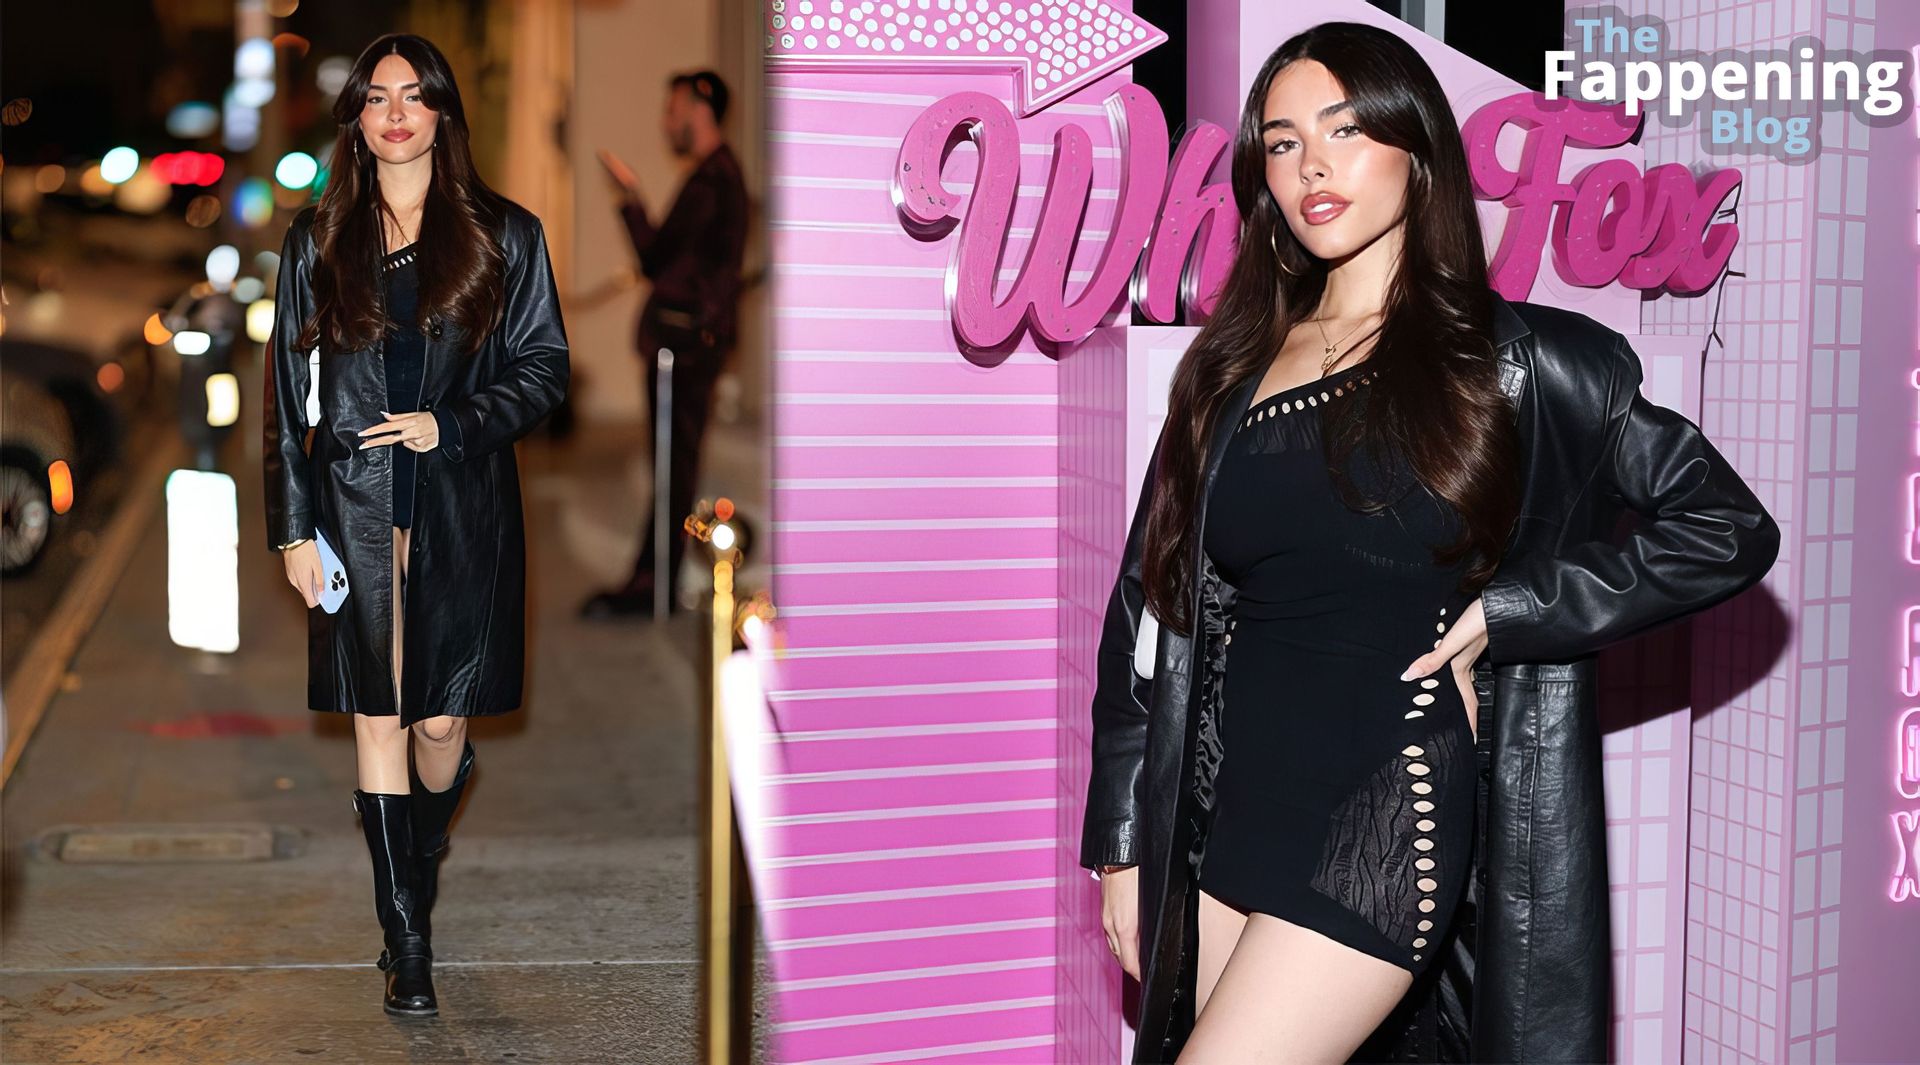 Madison Beer Looks Hot in a LBD at the White Fox Sin City Party (10 Photos)